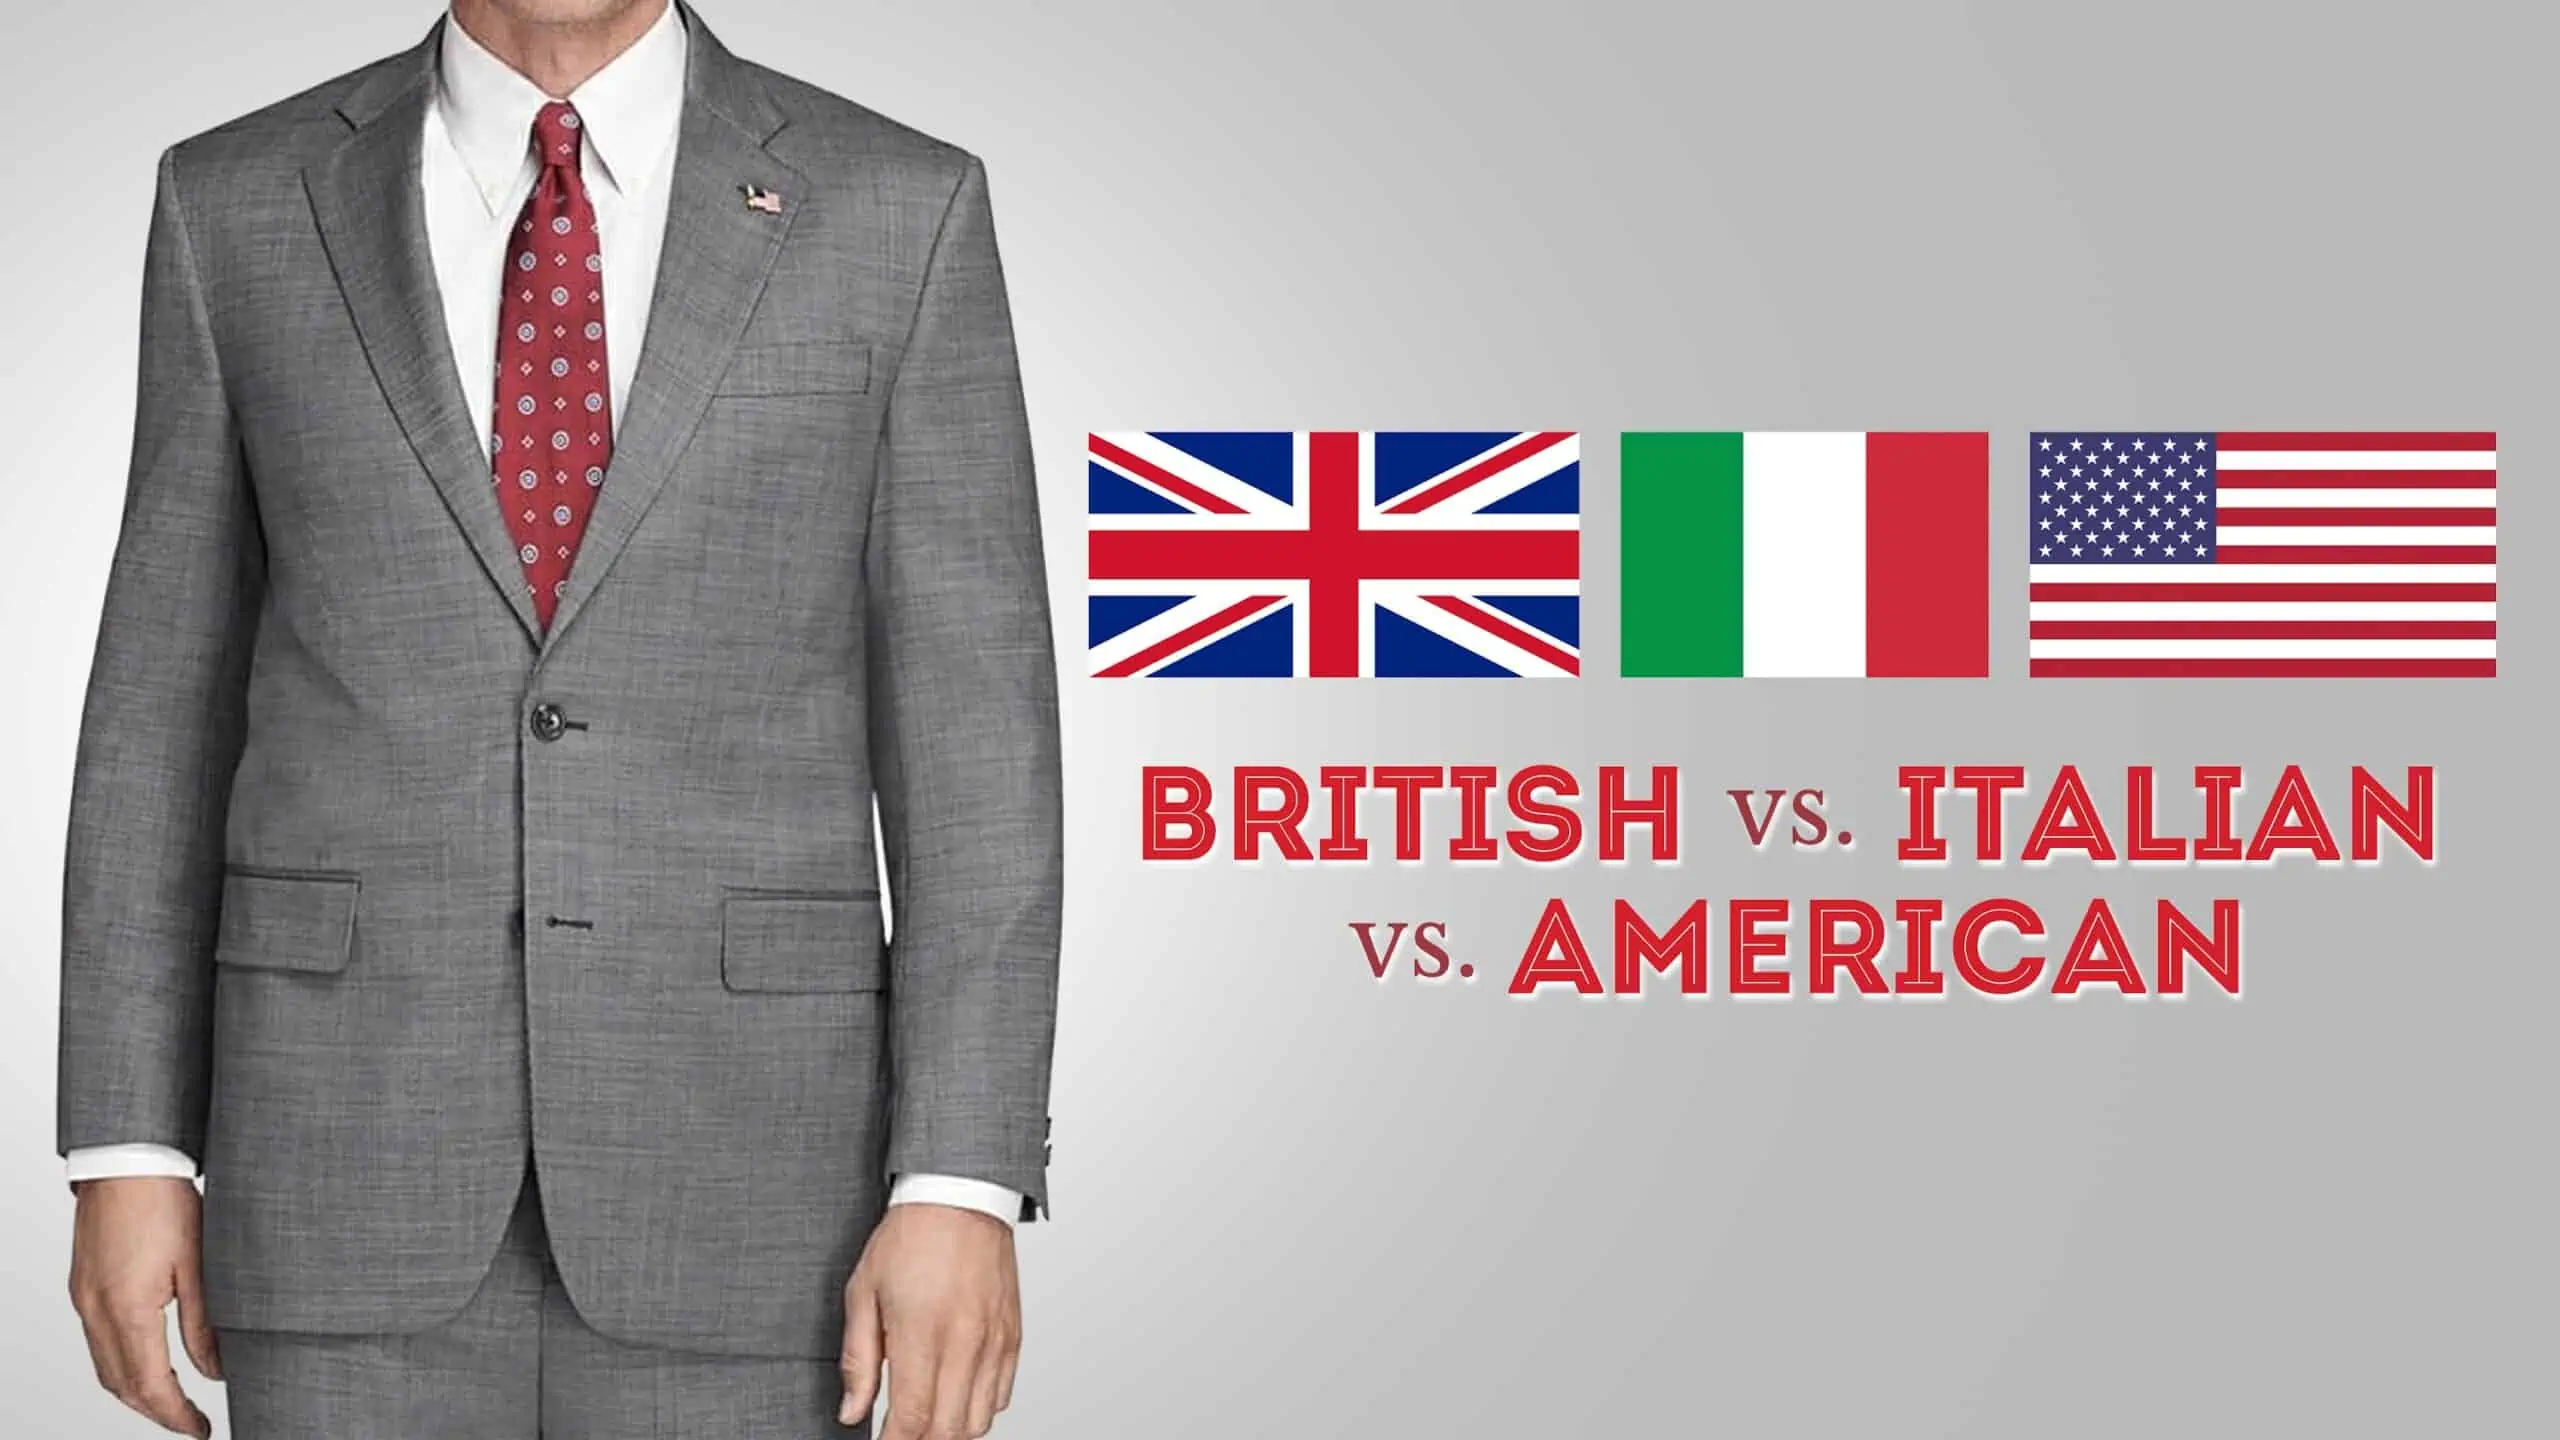 What Are The Differences Among British, Italian And American Suit Styles?